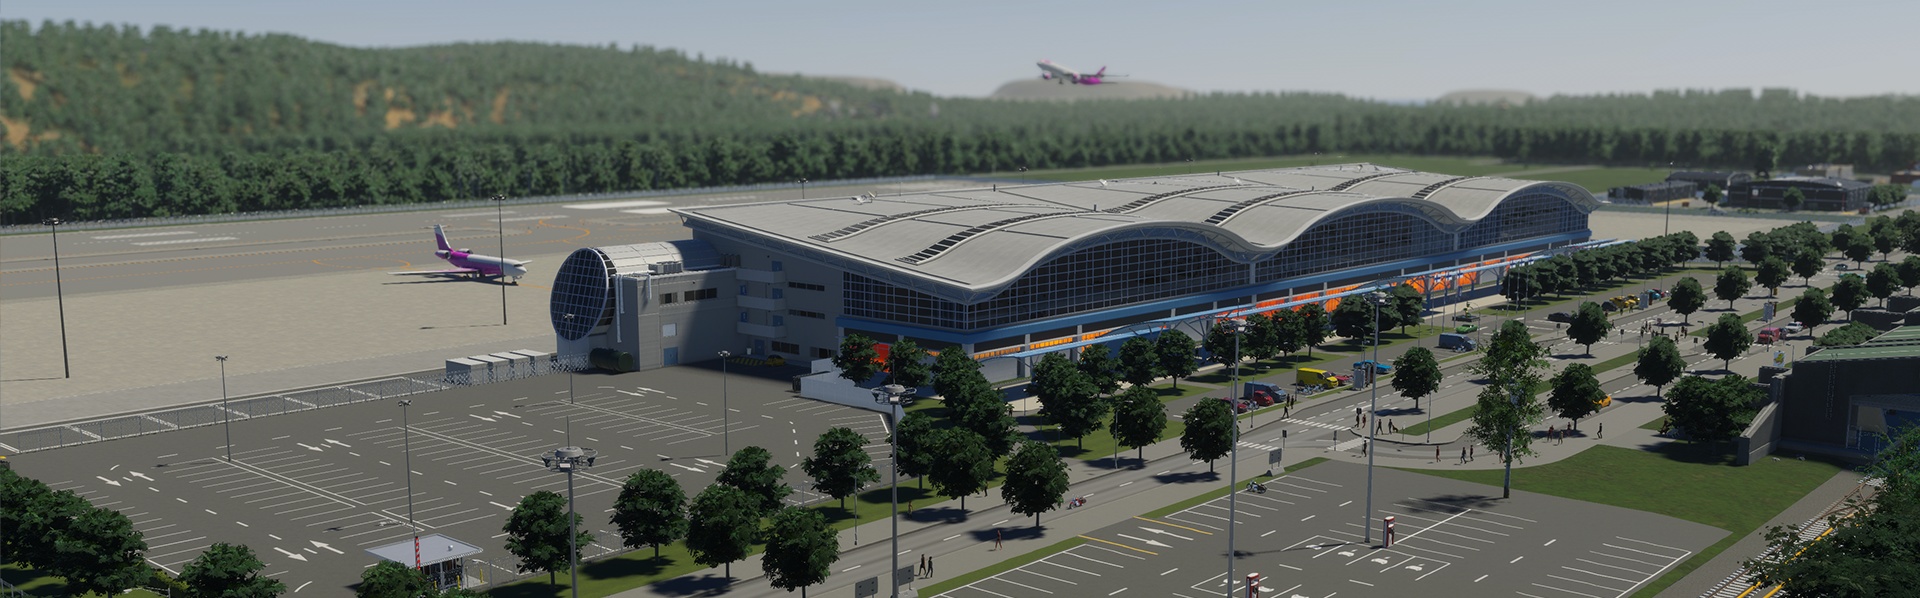 (Airports are used to travel to other cities in Cities Skylines 2.)